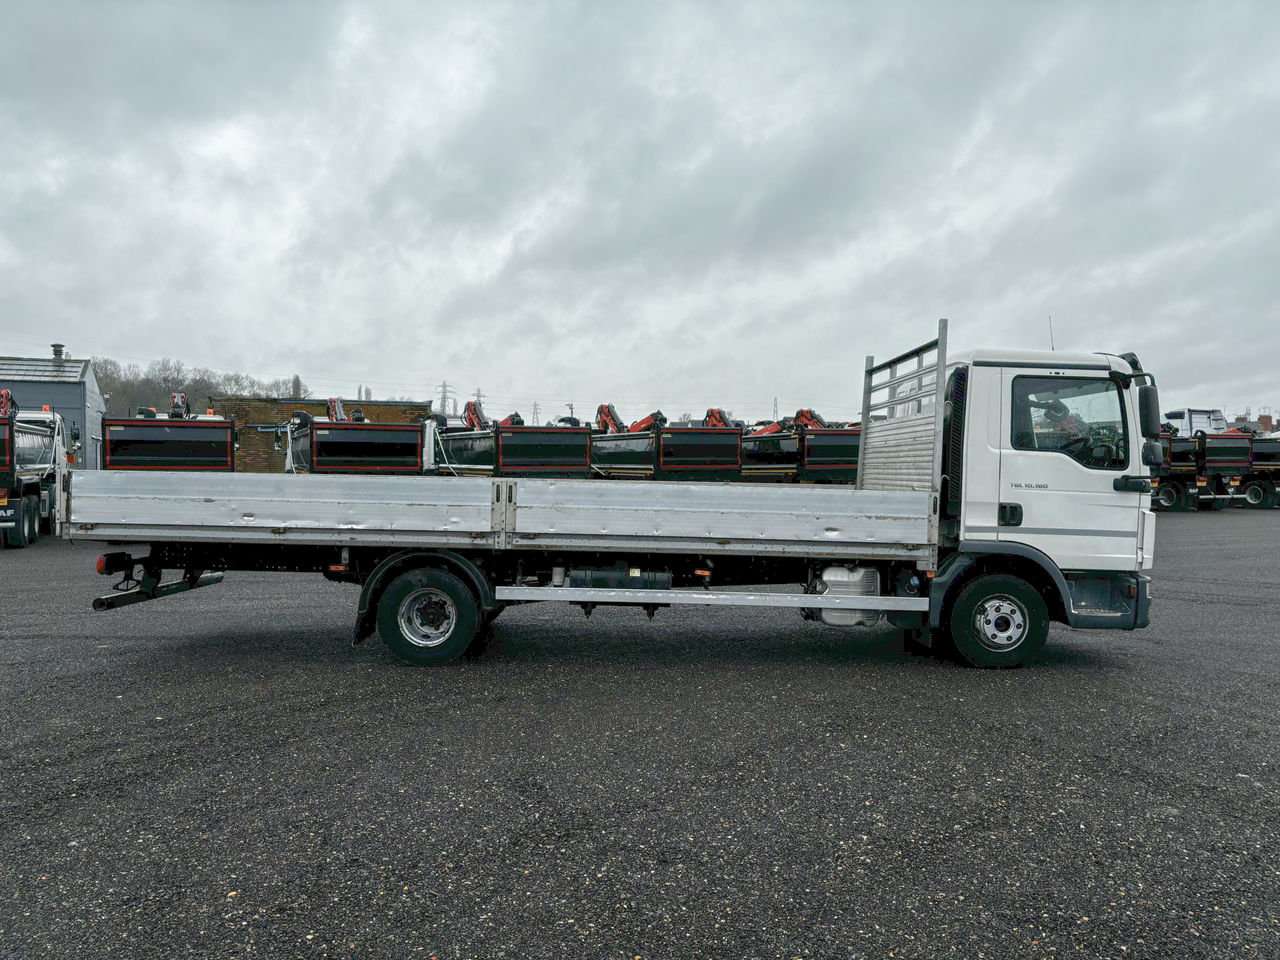 Ready to go MAN TGL 10.190, Dropside, 190, 7.5 Tonne, Day Cab, Automatic, 360° Rotating Beacons, 4 Dropsides, Adjustable Rear Underrun Bar, Dual Passenger Seat, Electric Windows, , -, - | for sale at MV Commercial, the UKs leading Truck, Trailers and Van supplier. (SN68VWW 114091)